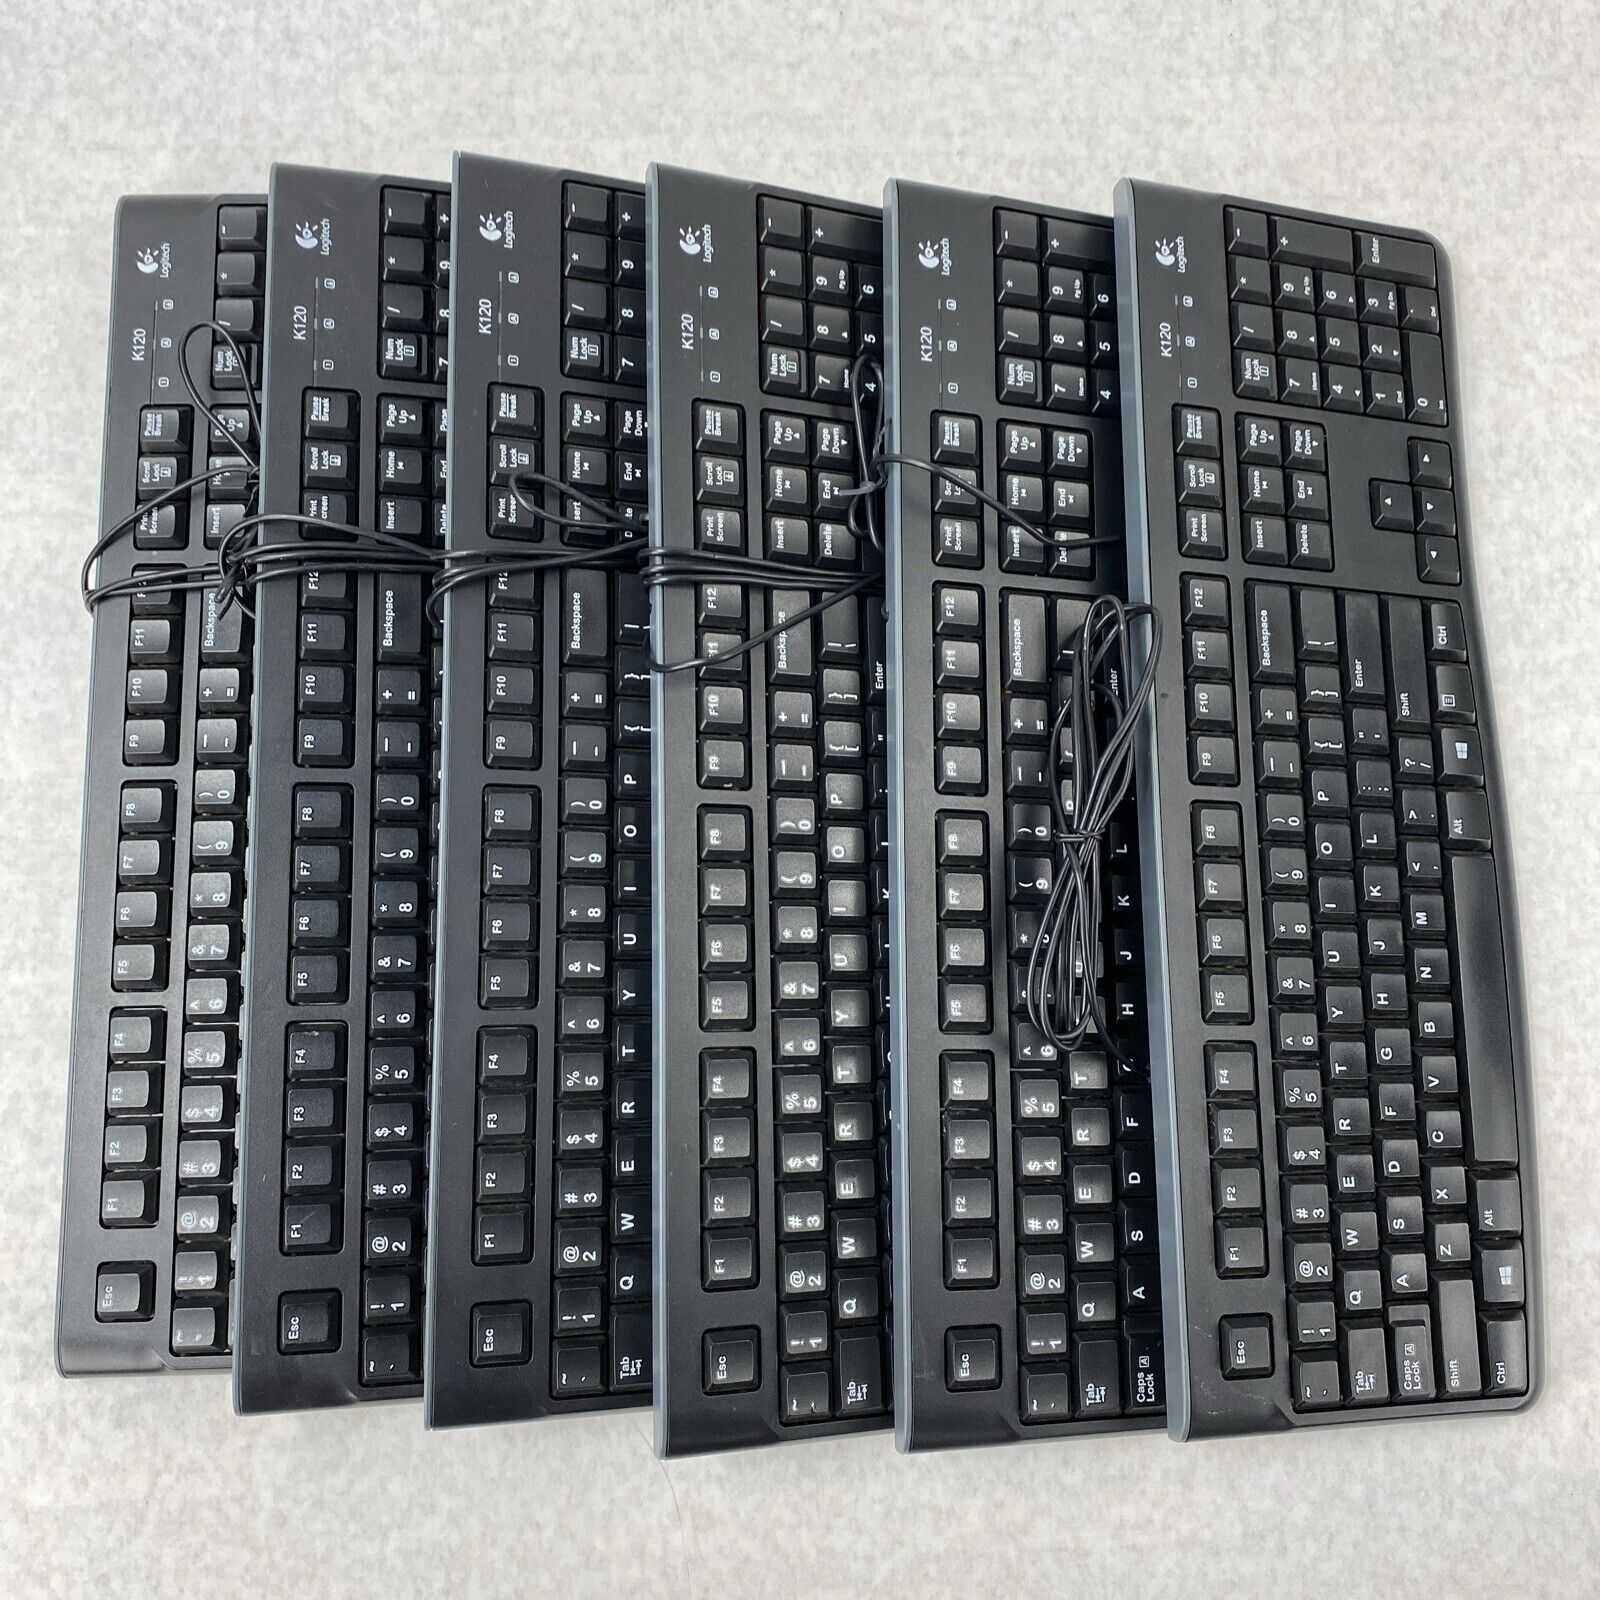 Lot of 6 Logitech K120 Wired Plug-and-Play USB Standard Keyboard